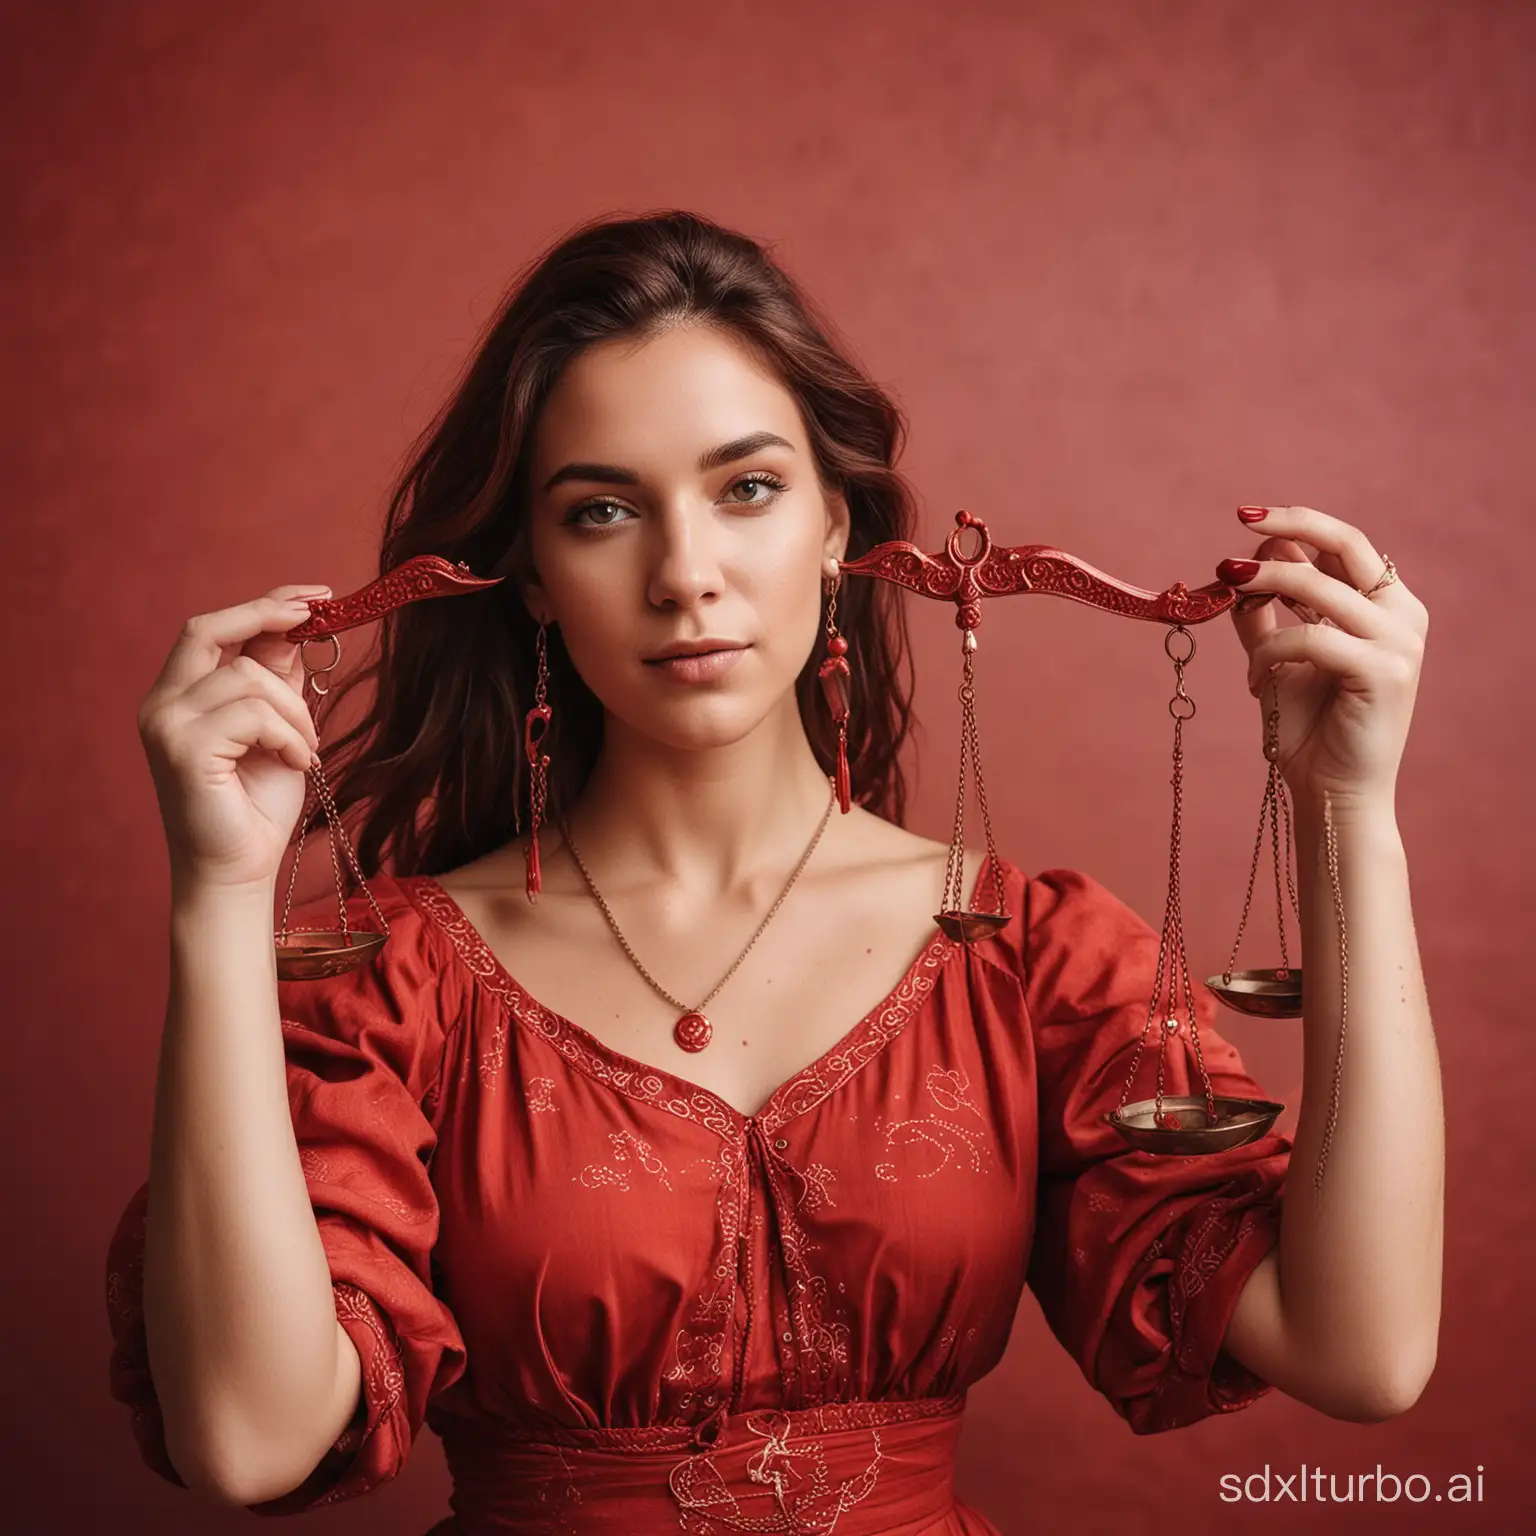 Take a photograph of a woman who embodies the zodiac sign Libra, with scales in her hands, in a red color scheme.